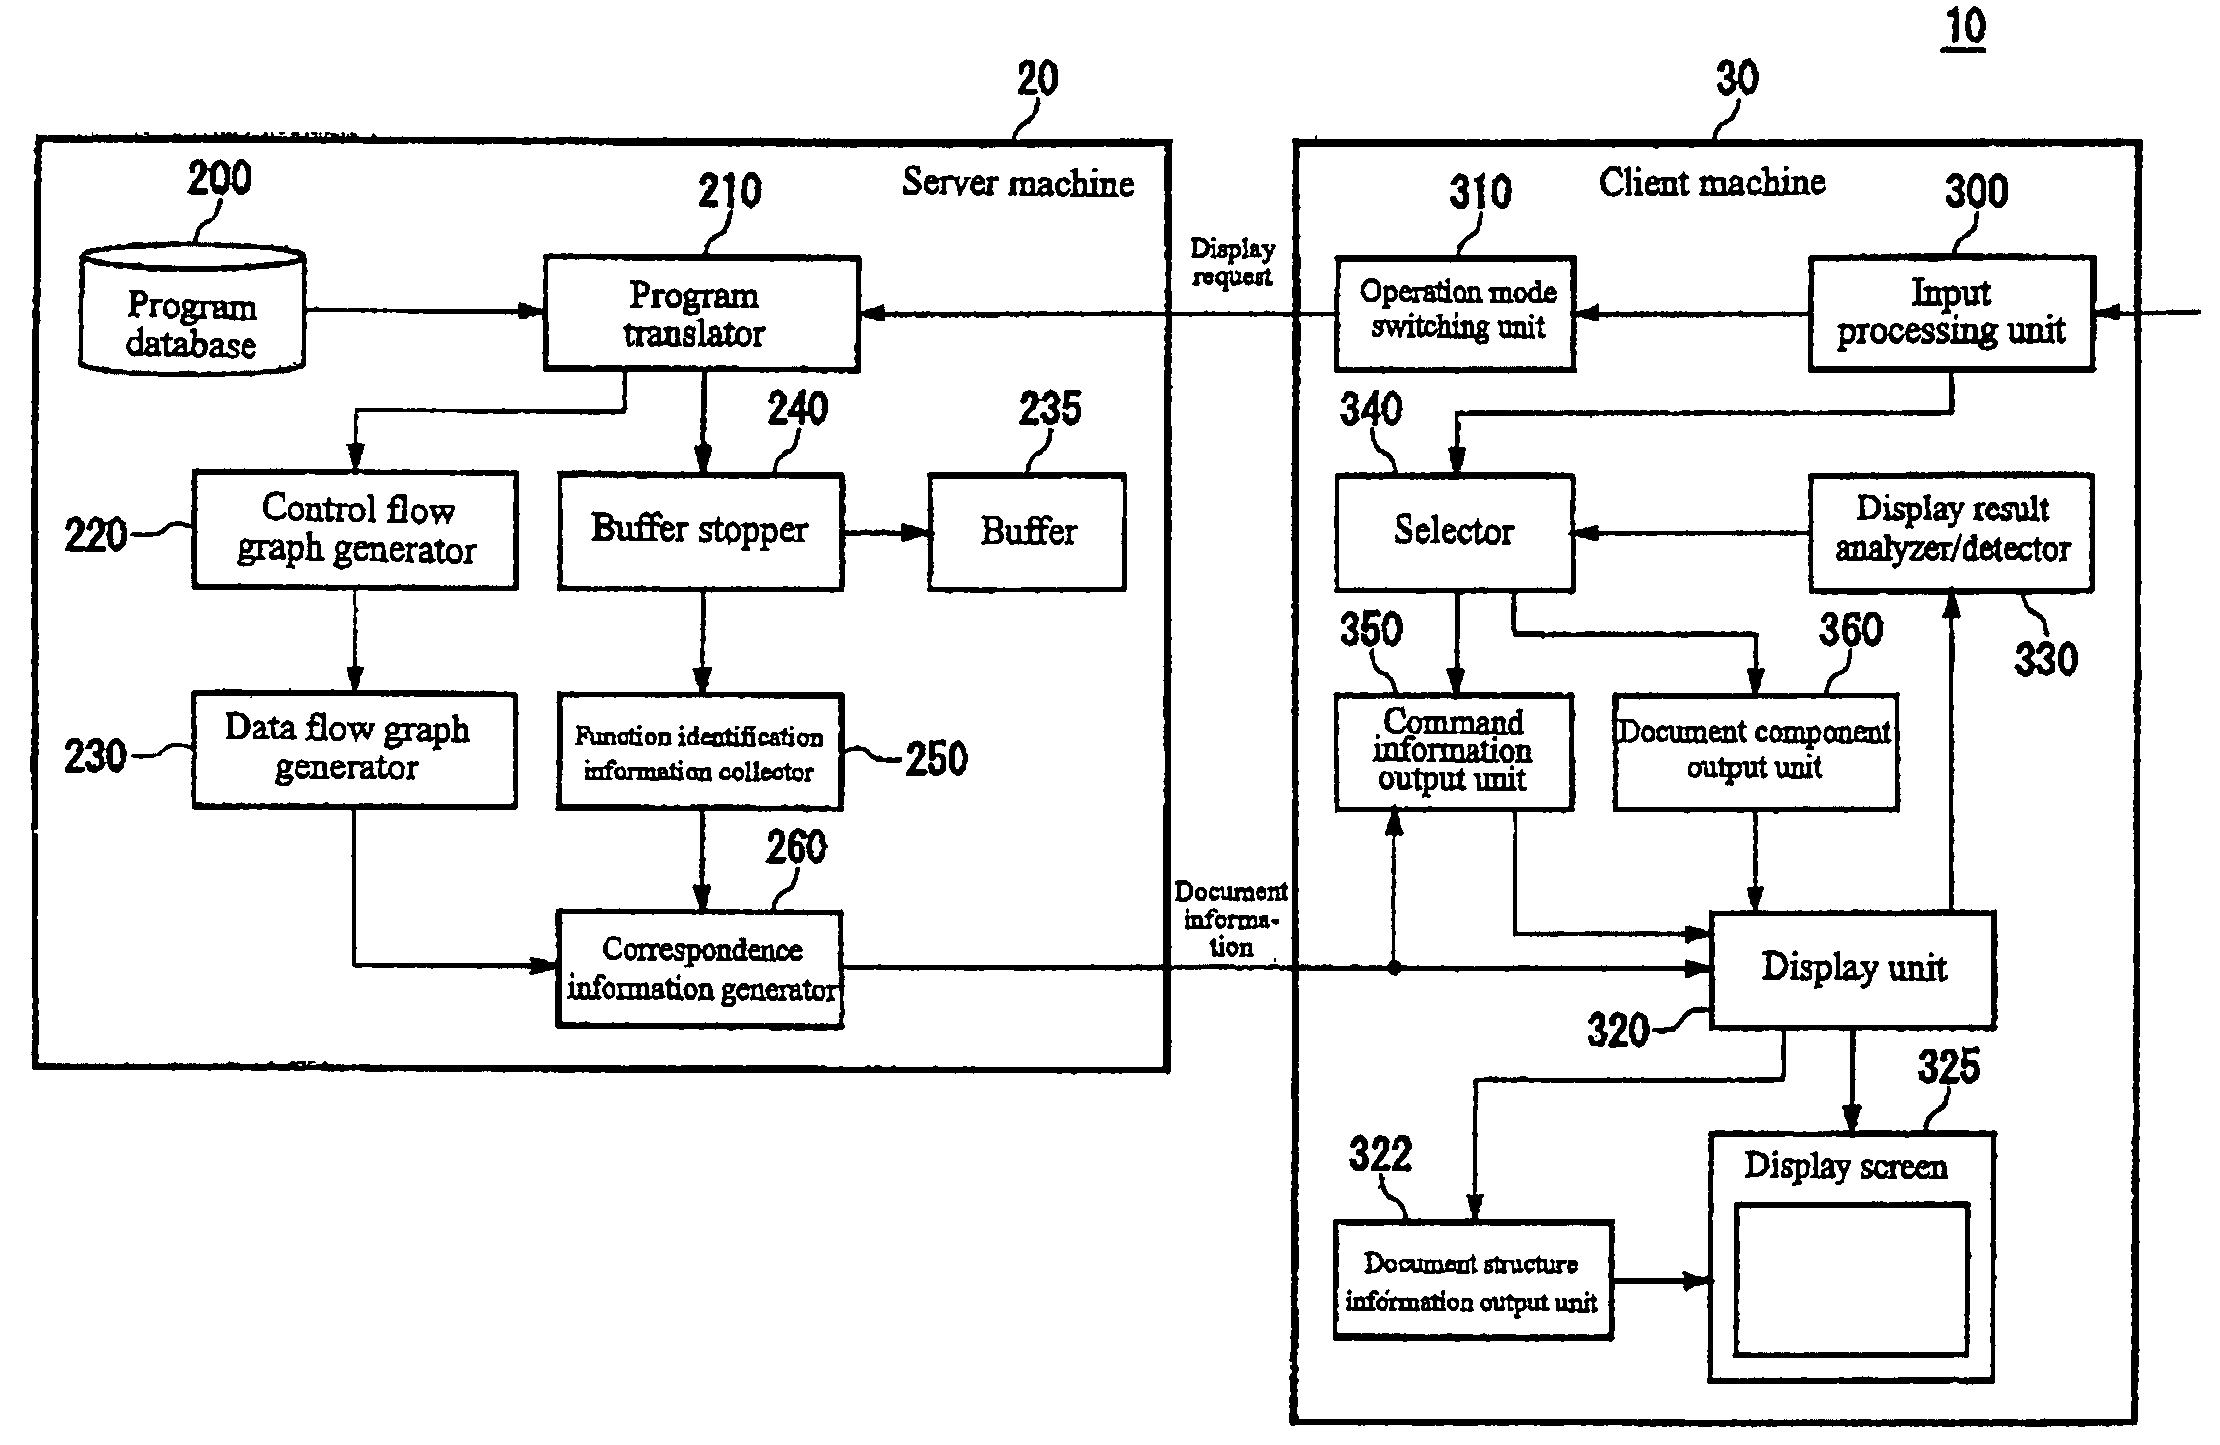 Method for generating document components and managing same